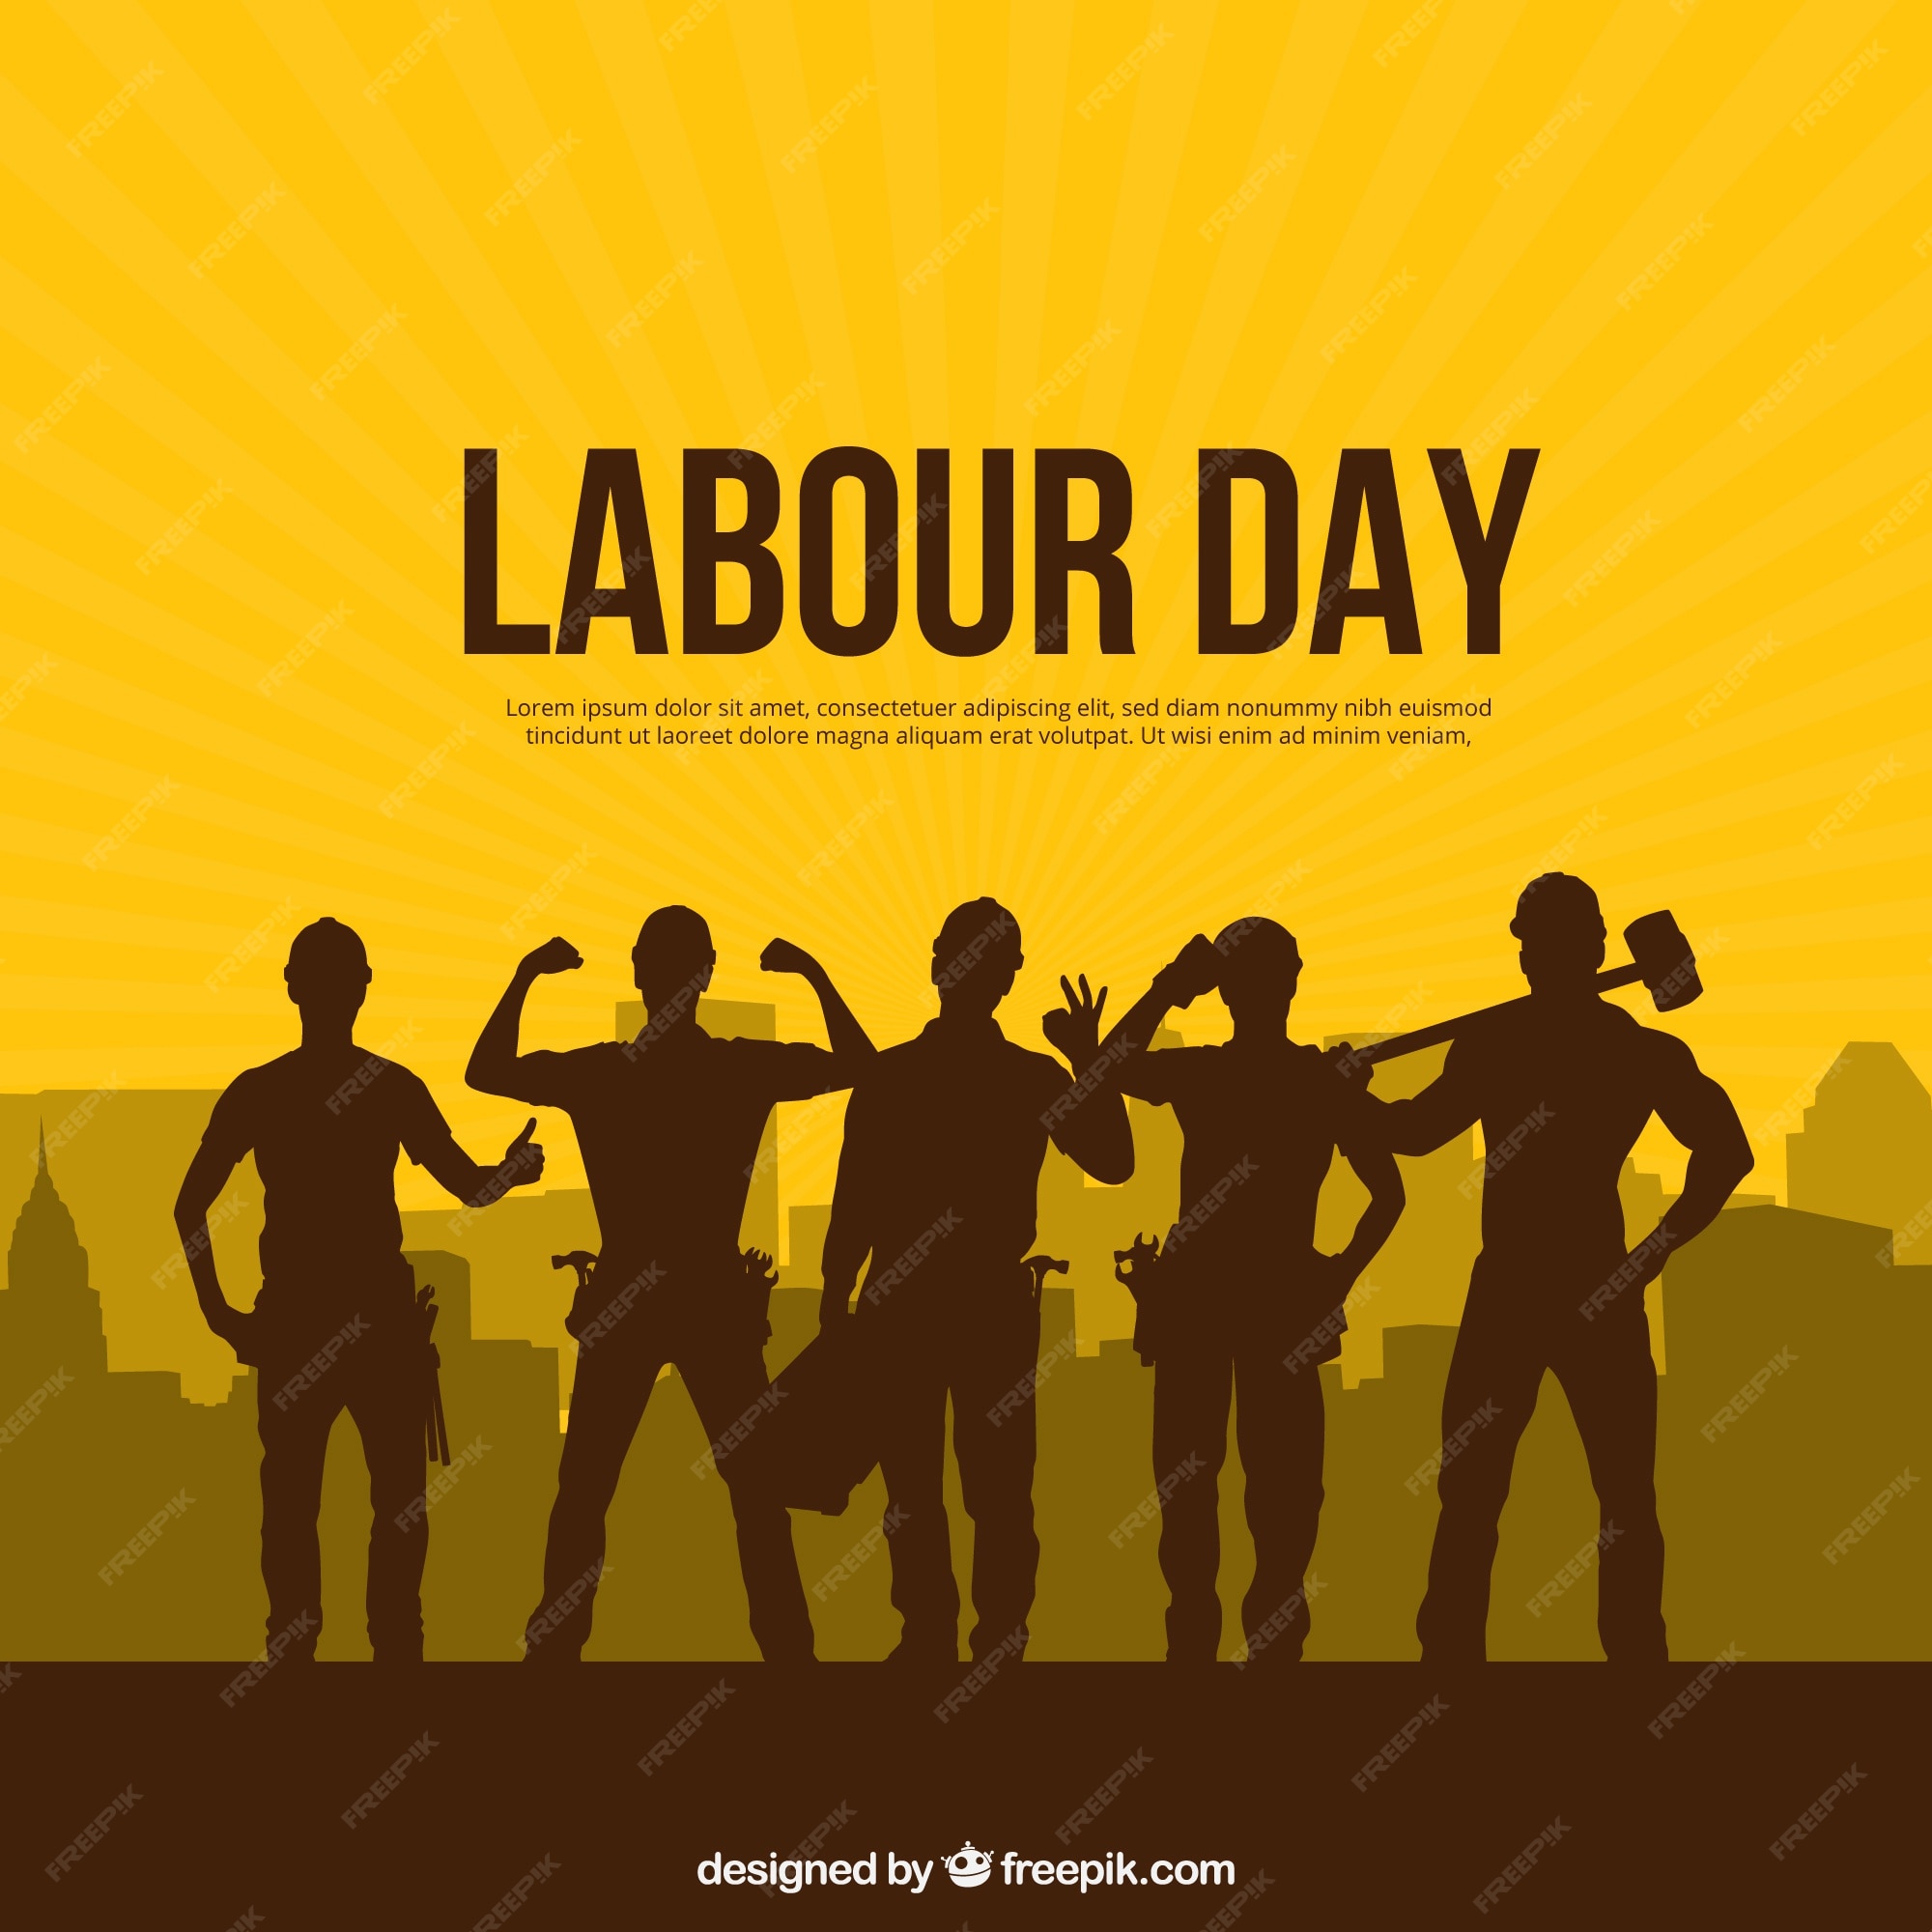 Details 100 labour day background